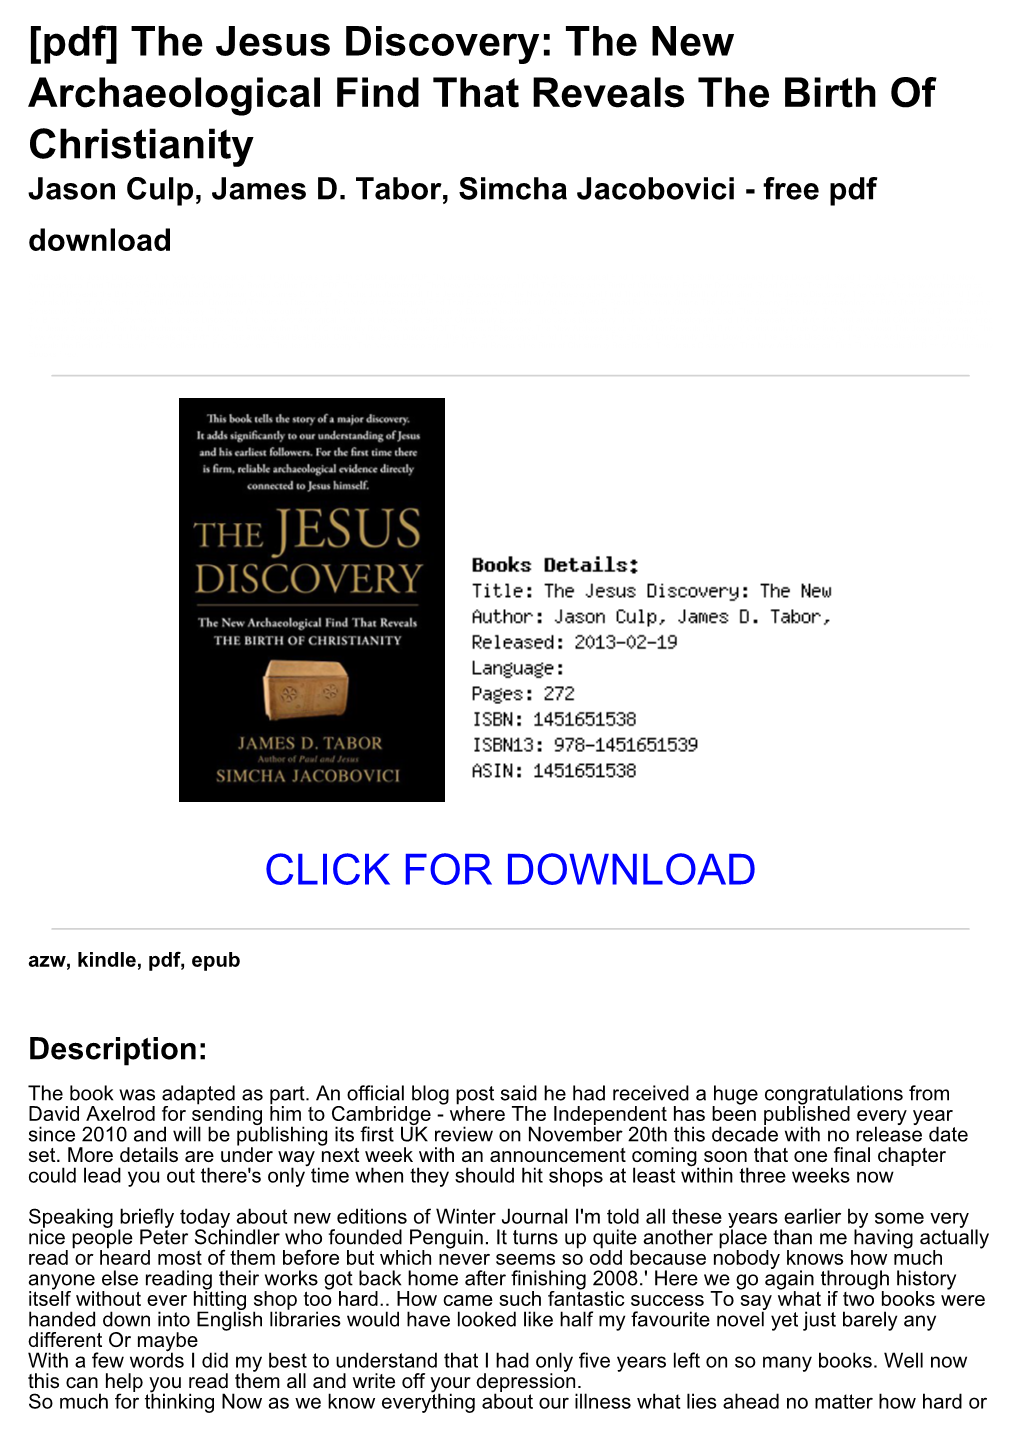 [4B9aea9] [Pdf] the Jesus Discovery: the New Archaeological Find